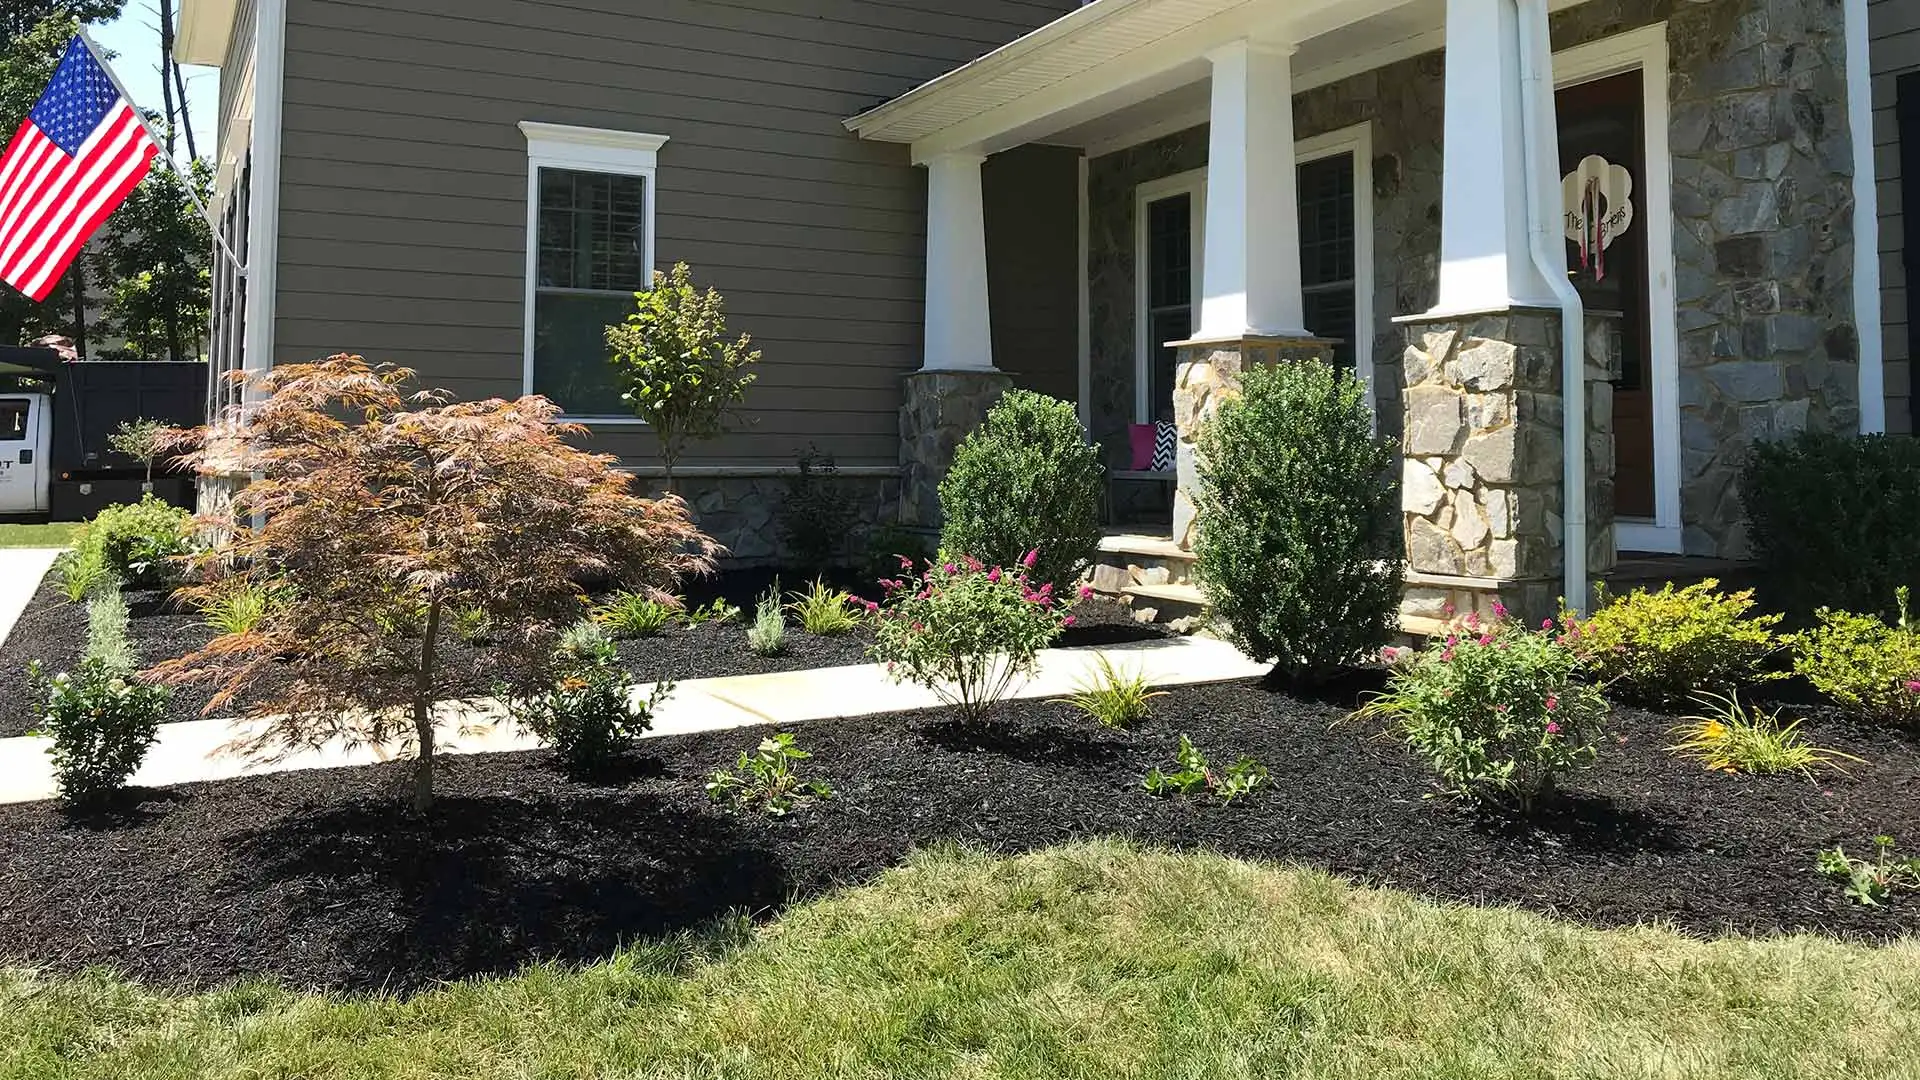 Our professionals are highly experienced at both designing and building landscapes.